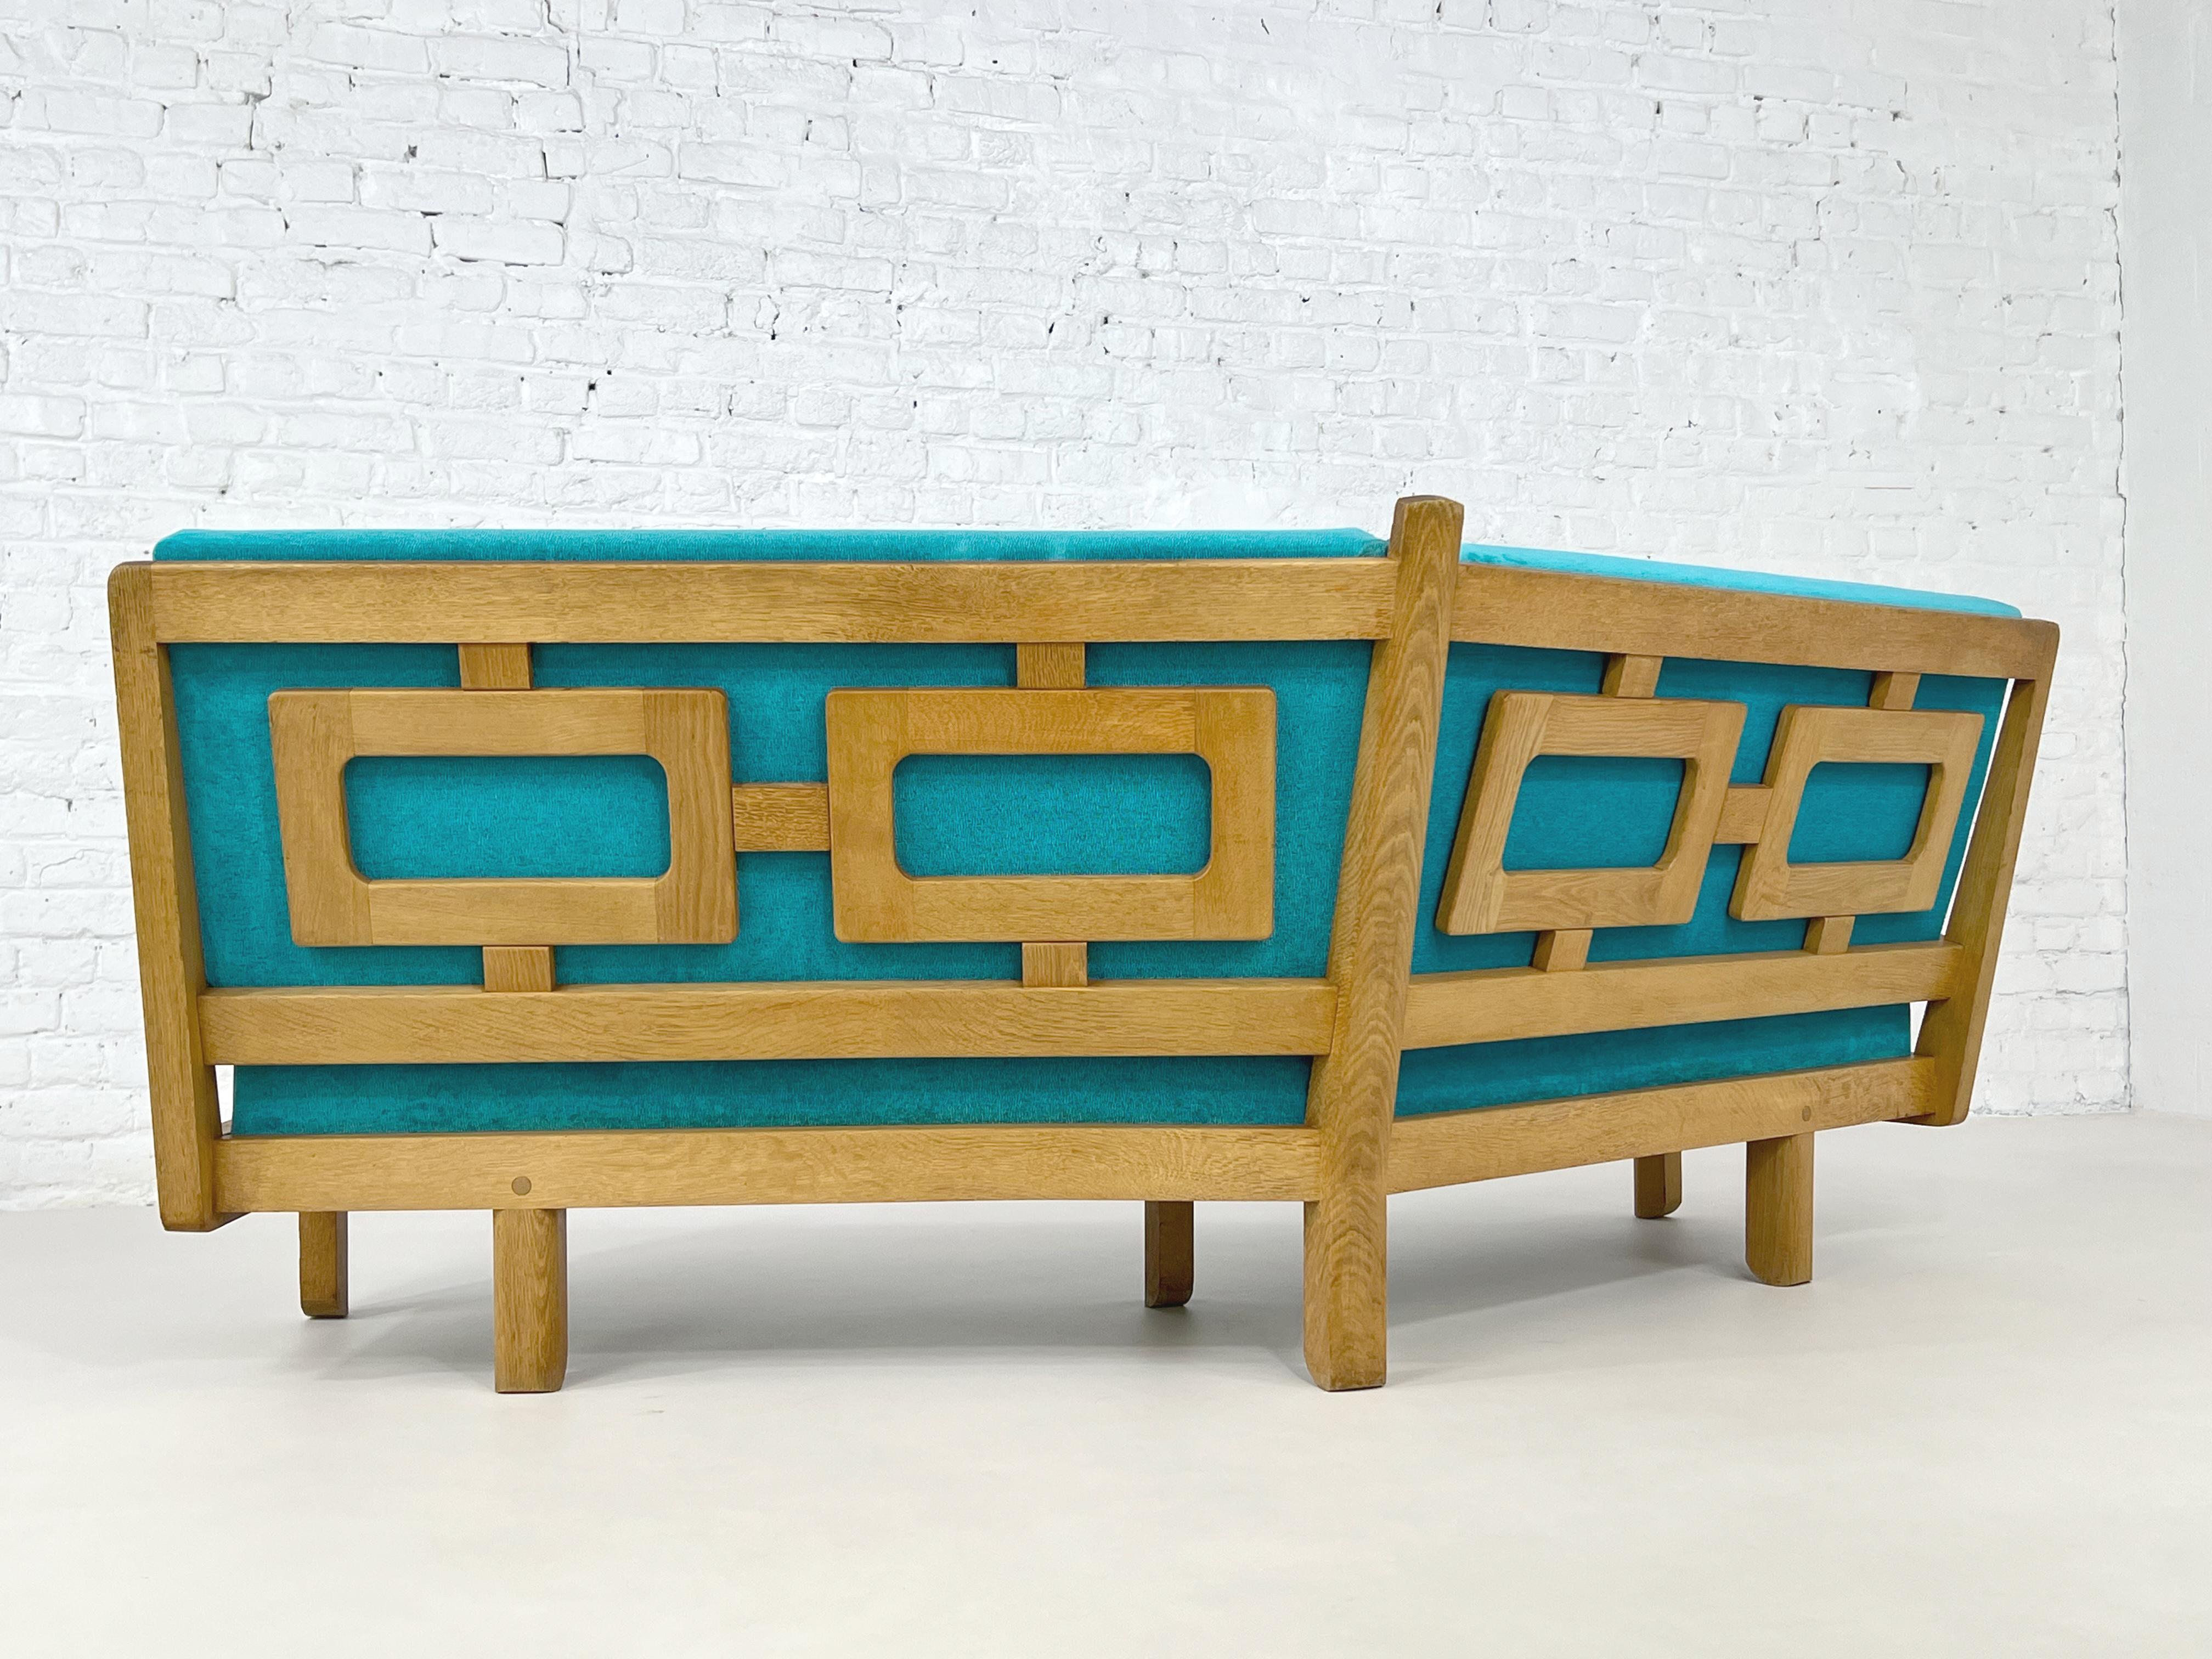 1950s - 1960s Guillerme et Chambron French Design Oak Wood Angular Curved Sofa For Sale 4